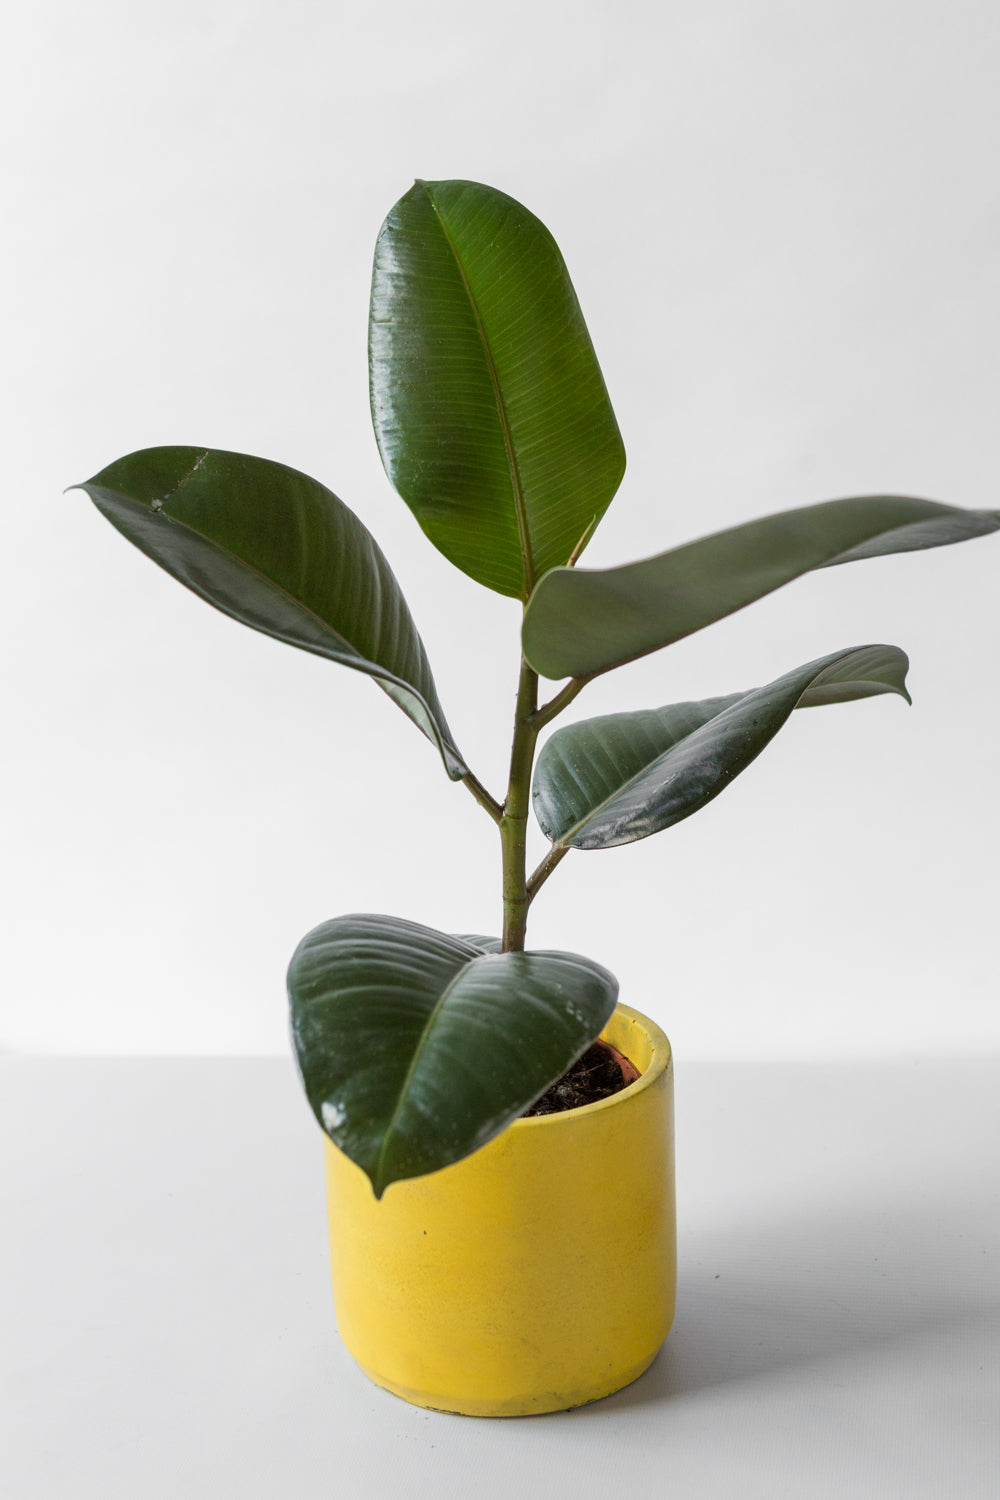 Rubber plant house plant with bold yellow handmade plant pot